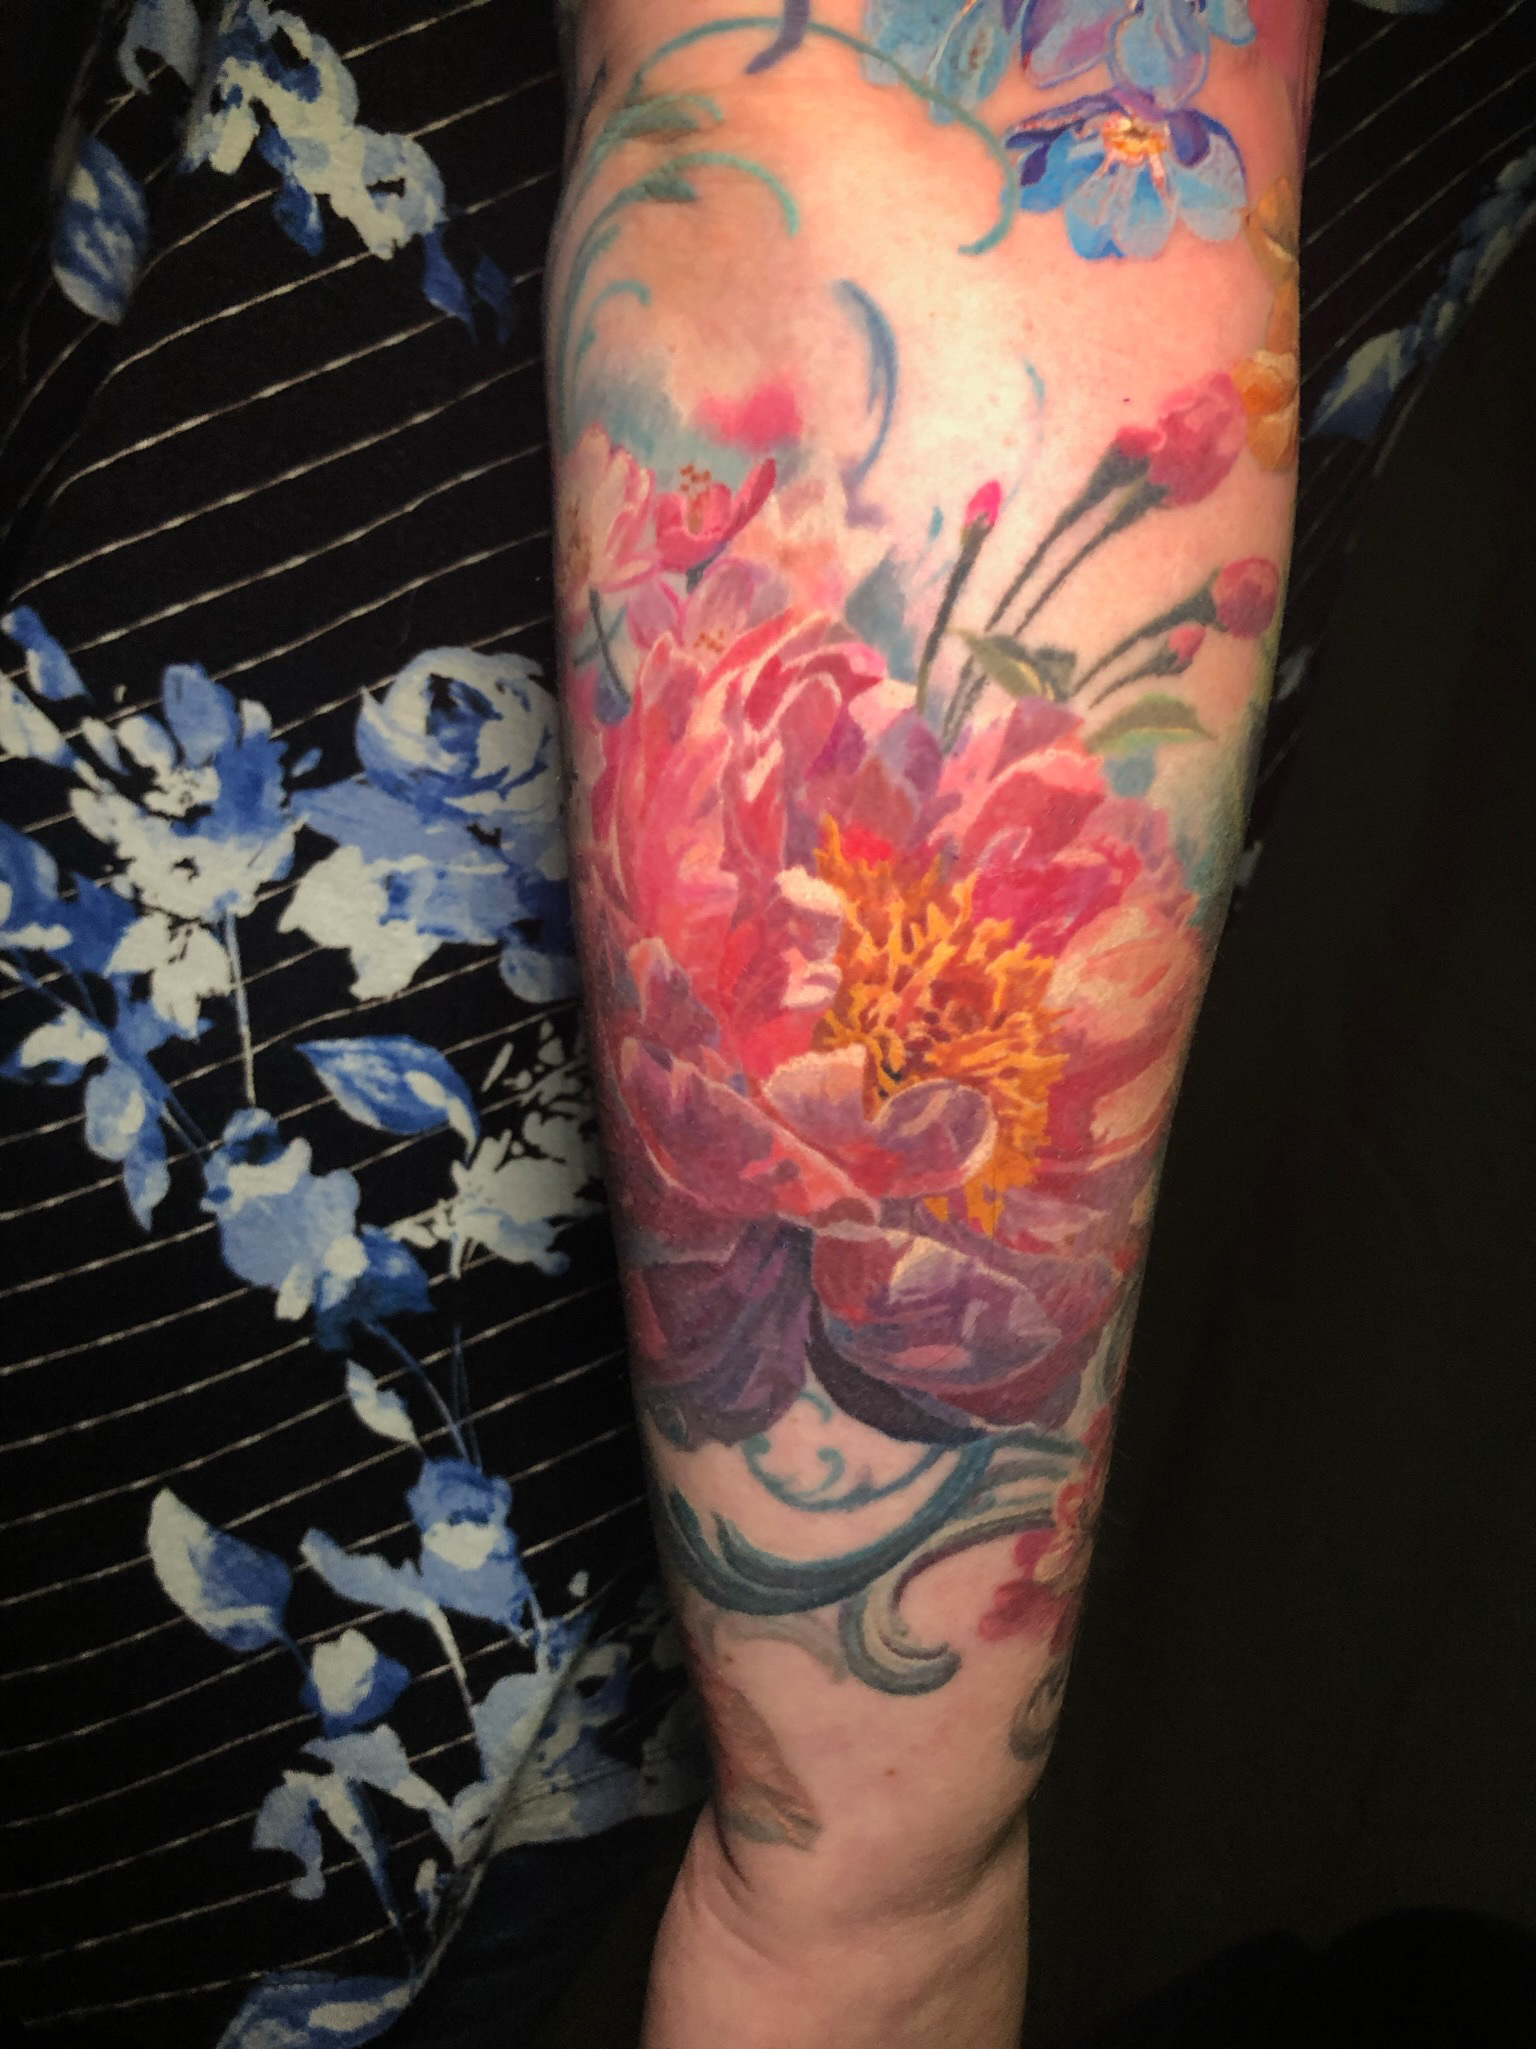 Sleeve done by Rachel Lena at Rising Tide Tattoo in West Warwick Rhode  Island Took 3 sessions and came out absolutely stunning  rtattoos